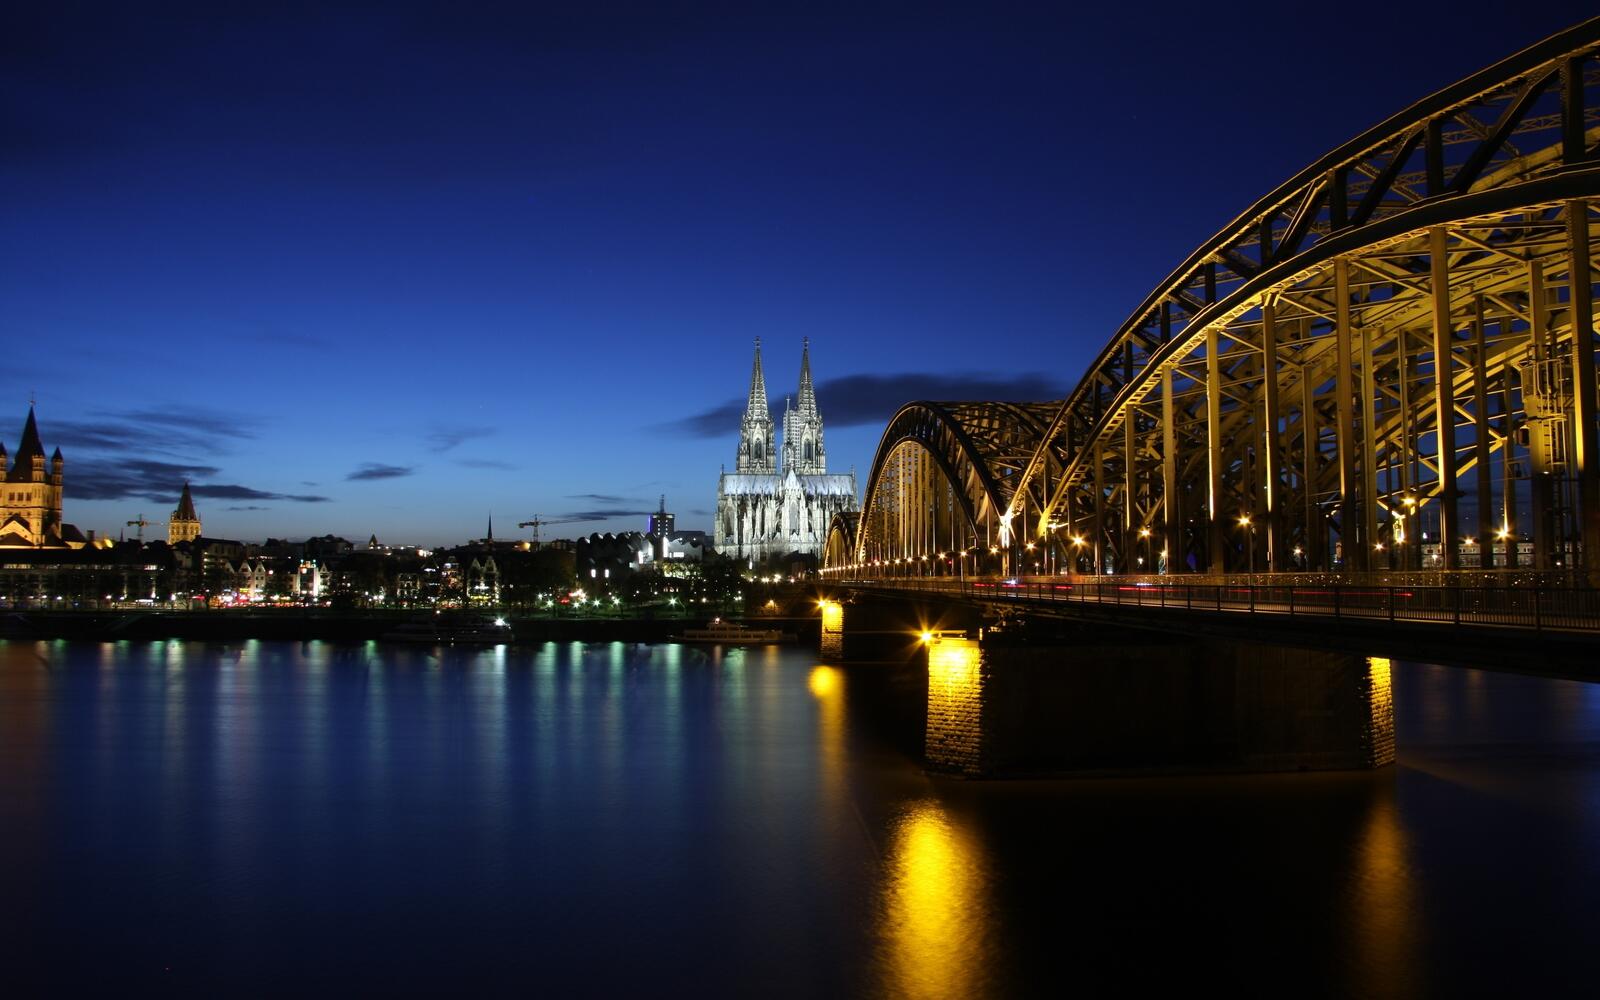 Free photo Night bridge over a river in Germany